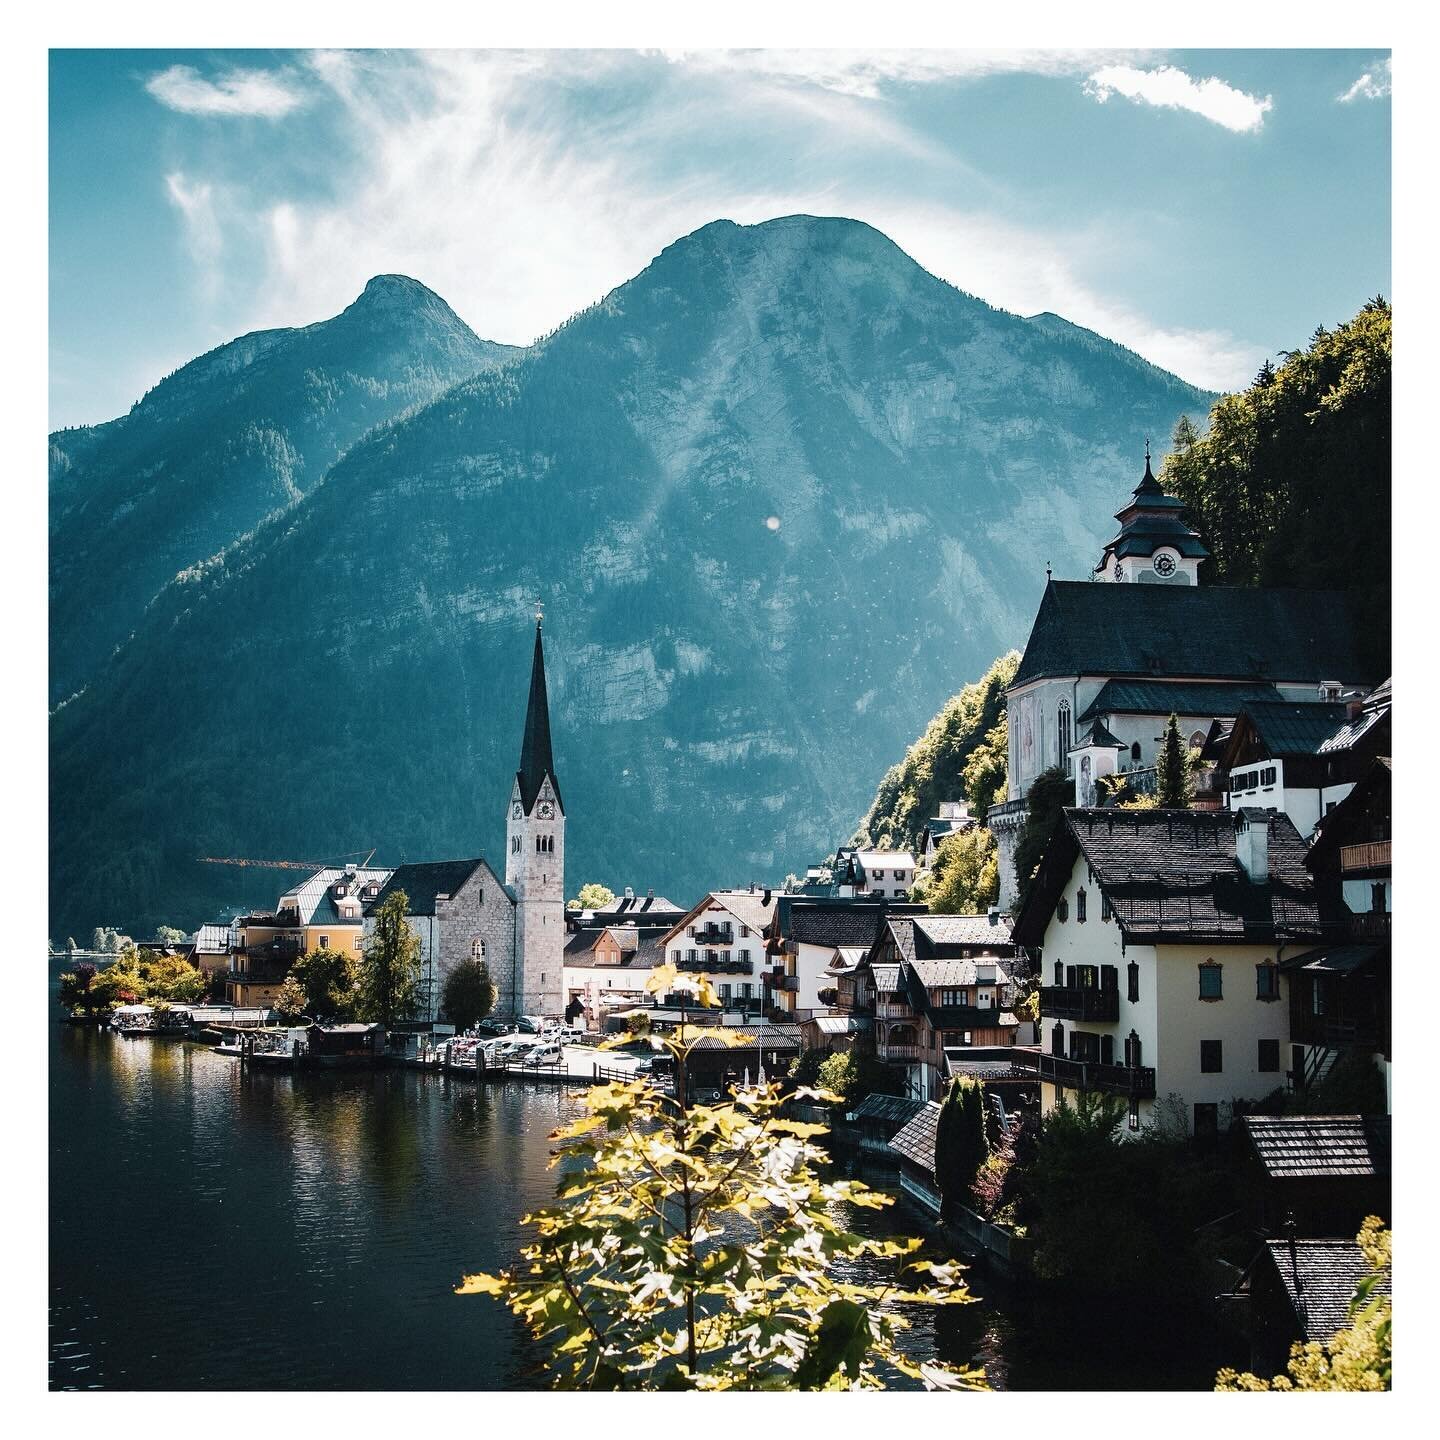 Hallstatt is a small town in the district of Gmunden, in the Austrian state of Upper Austria. Situated between the southwestern shore of Hallst&auml;tter See and the steep slopes of the Dachstein massif, the town lies in the Salzkammergut region, on 